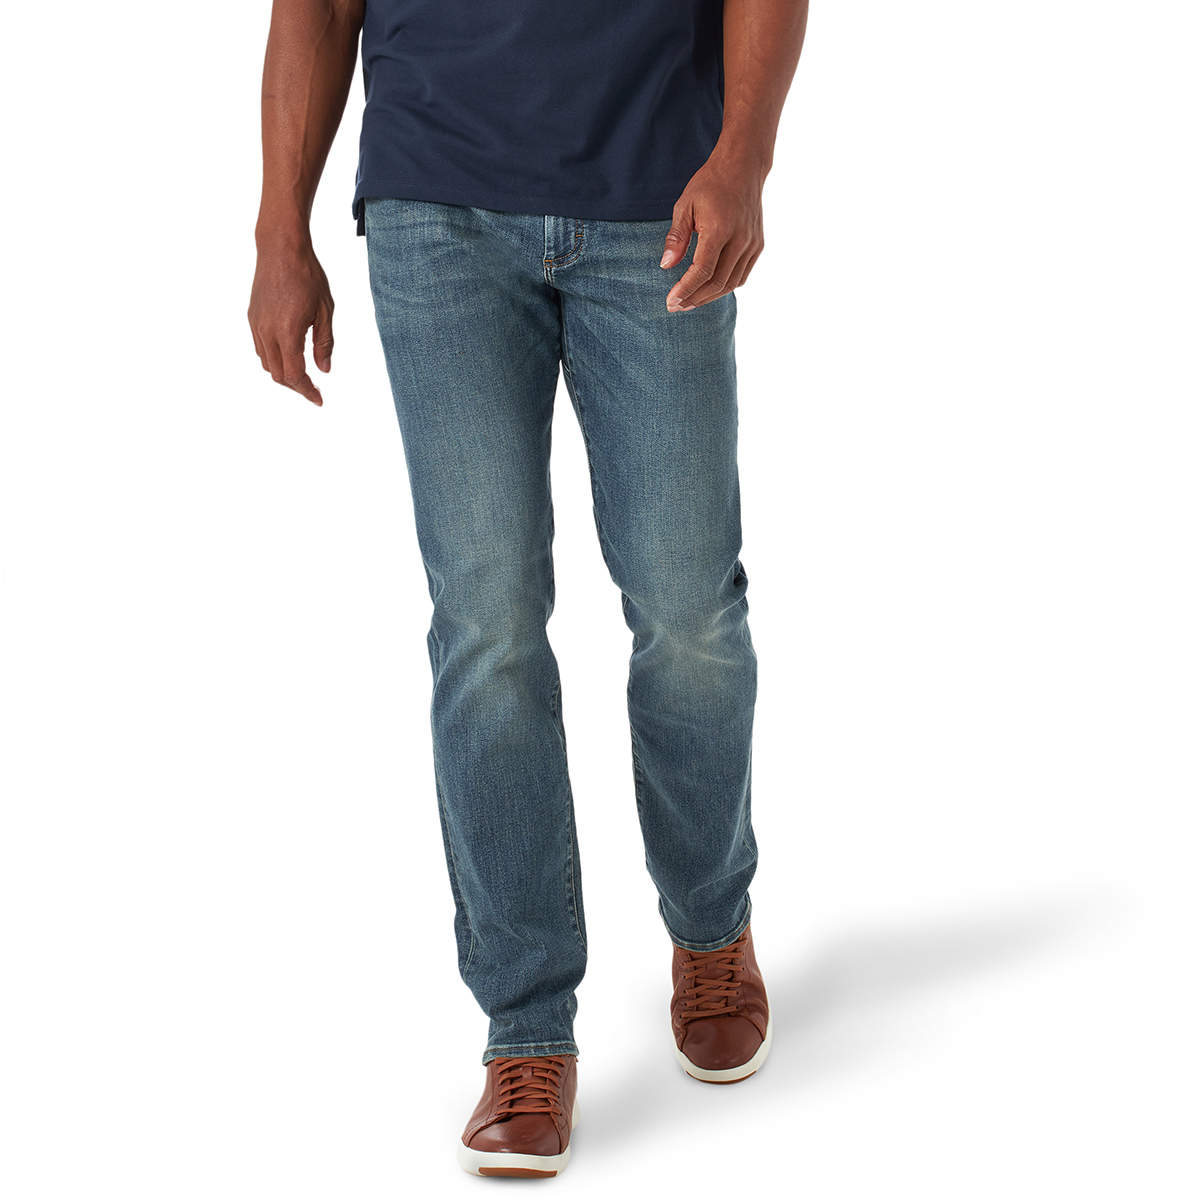 Mens Lee(R) Extreme Motion(tm) Straight Fit Jeans